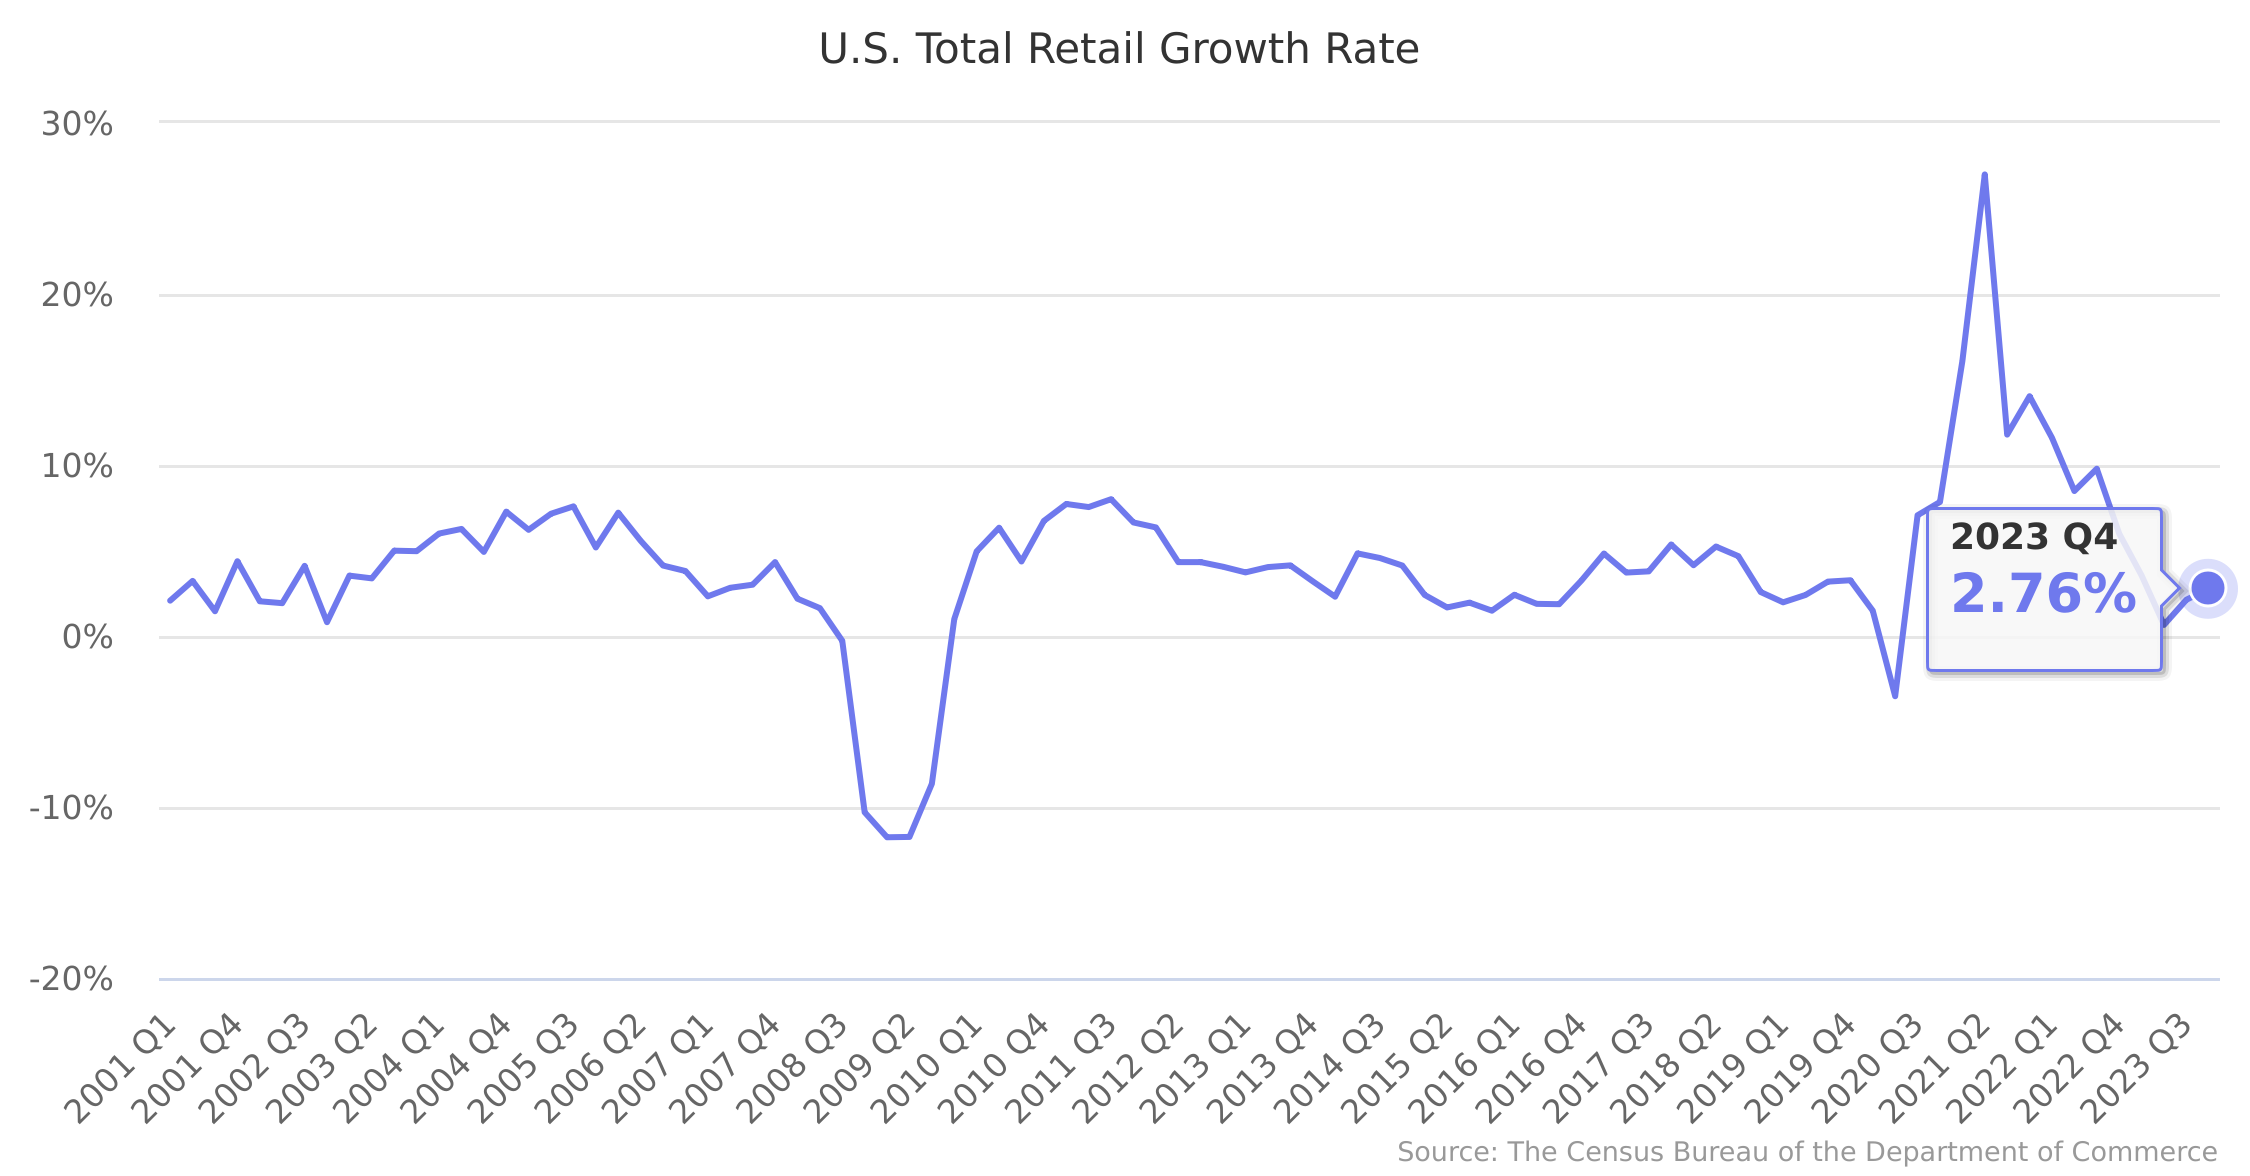 U.S. Total Retail Growth Rate 2001-2023